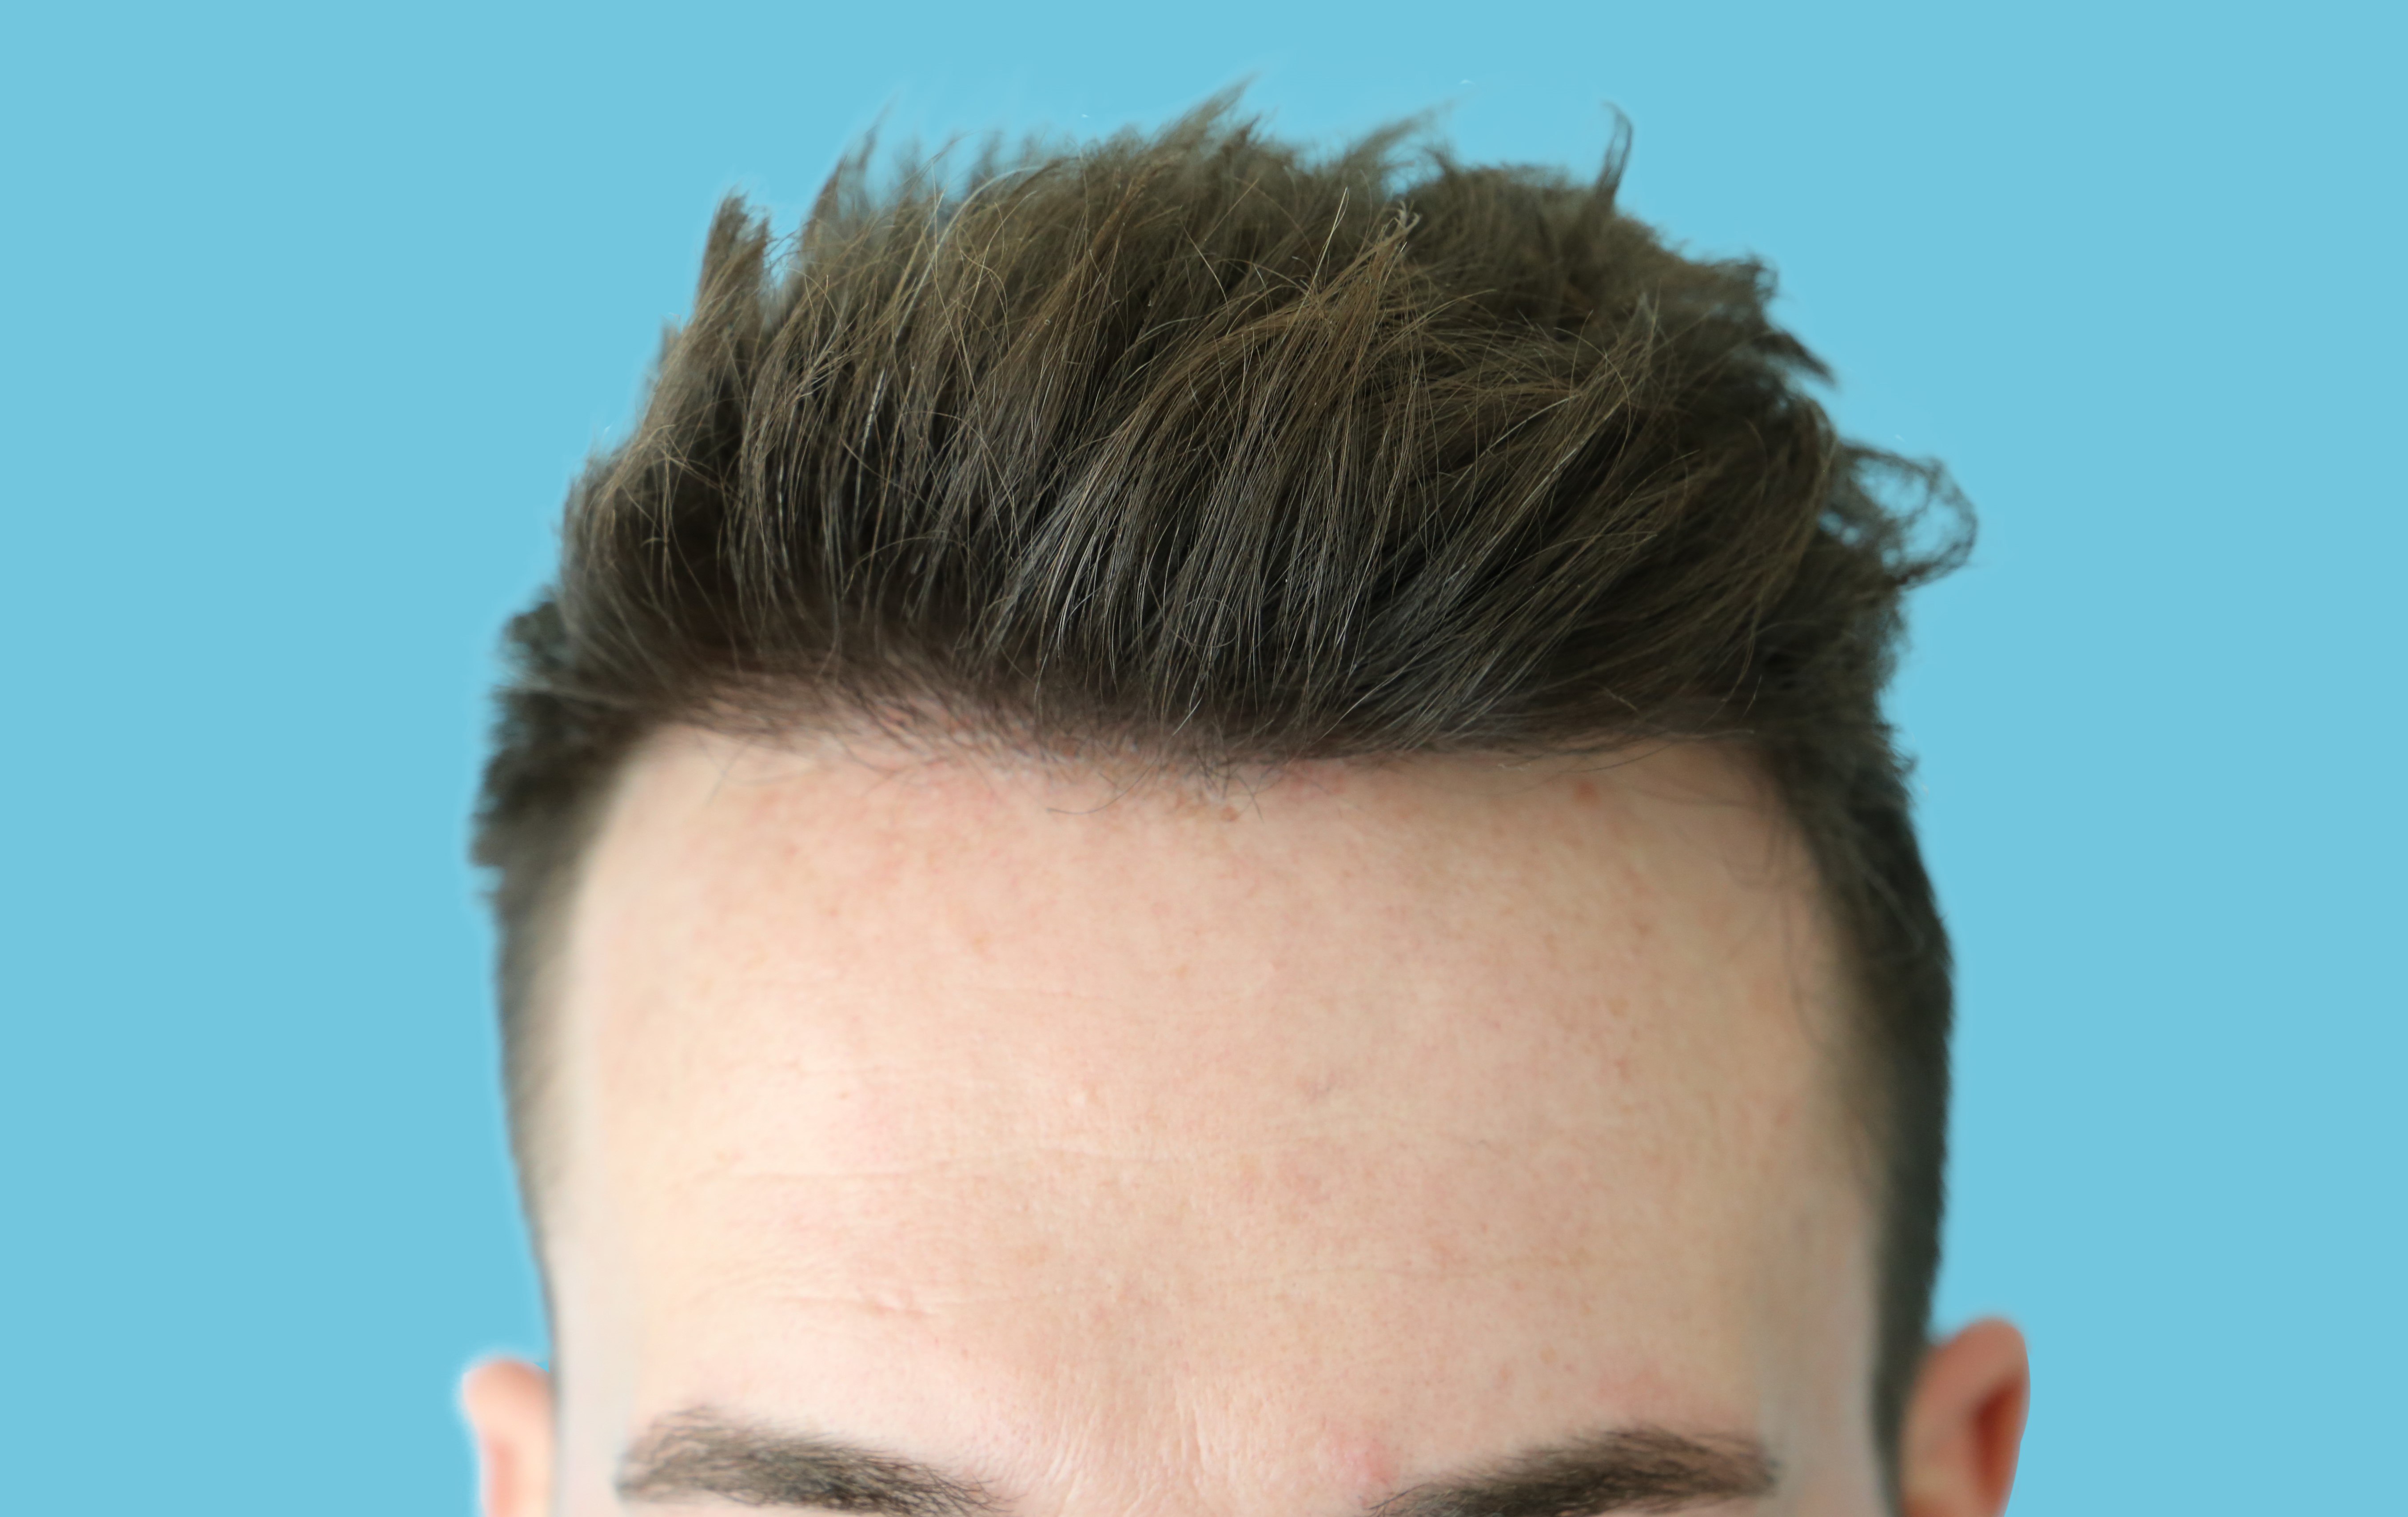 4. Fine Blonde Hair Transplant Before and After - wide 4